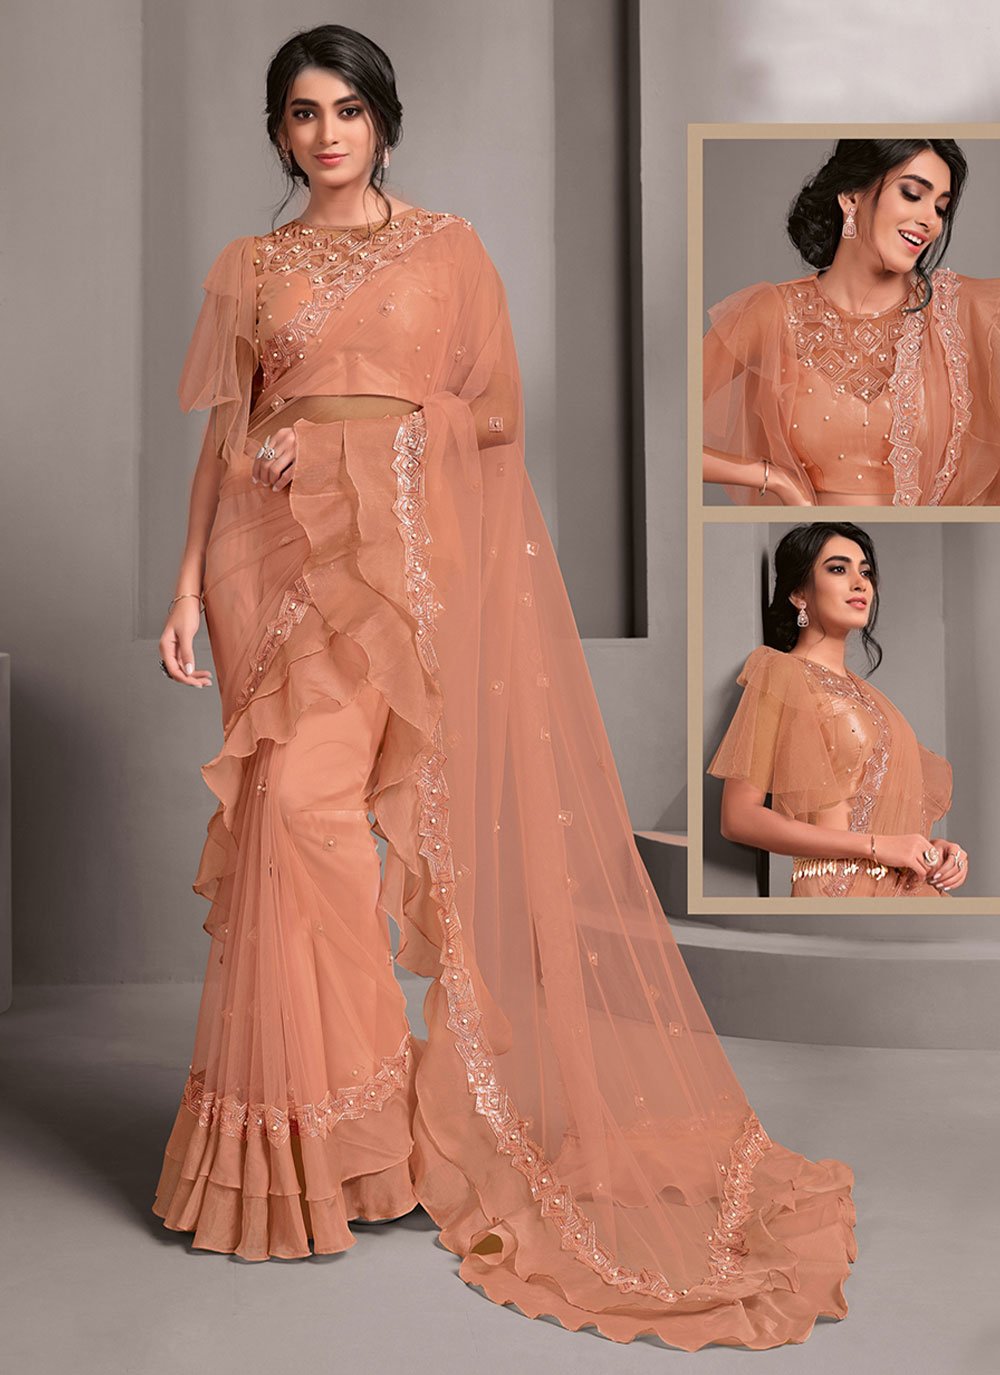 Ruffle Saree With Blouse/ Peach Ruffle Saree With Stitched Blouse